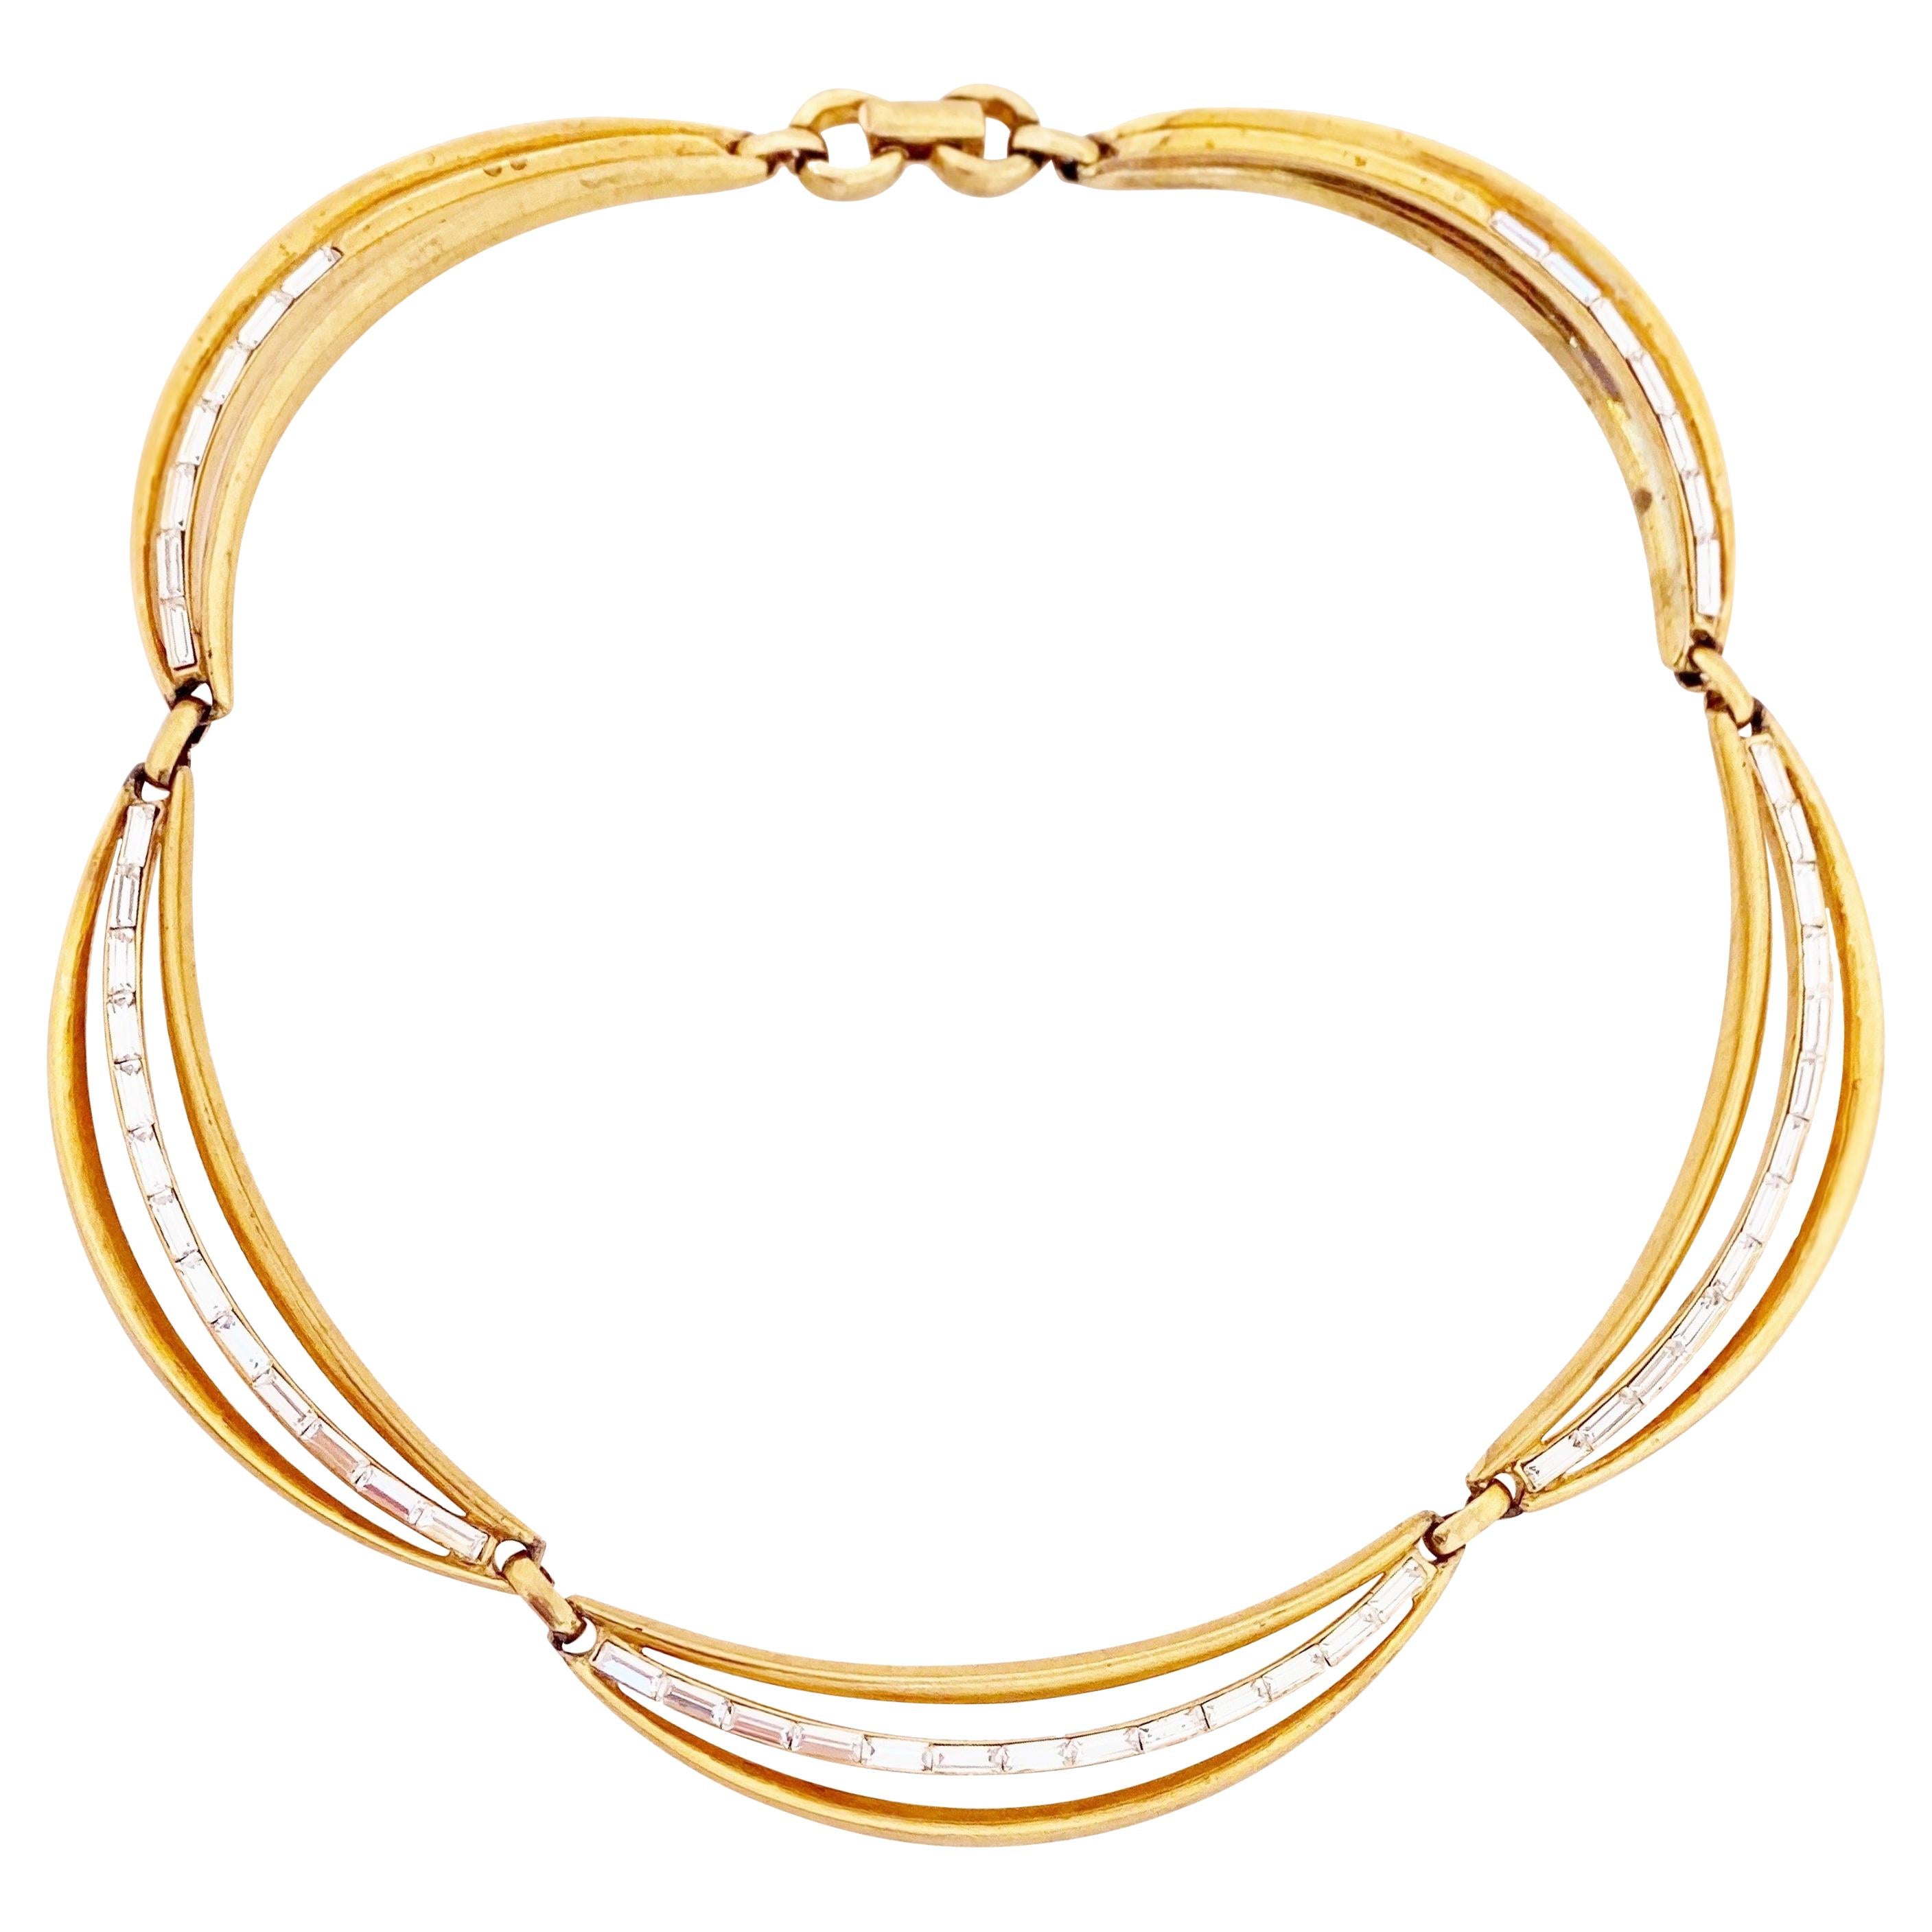 Draped Choker Necklace w Baguette Crystals By Alfred Philippe For Crown Trifari